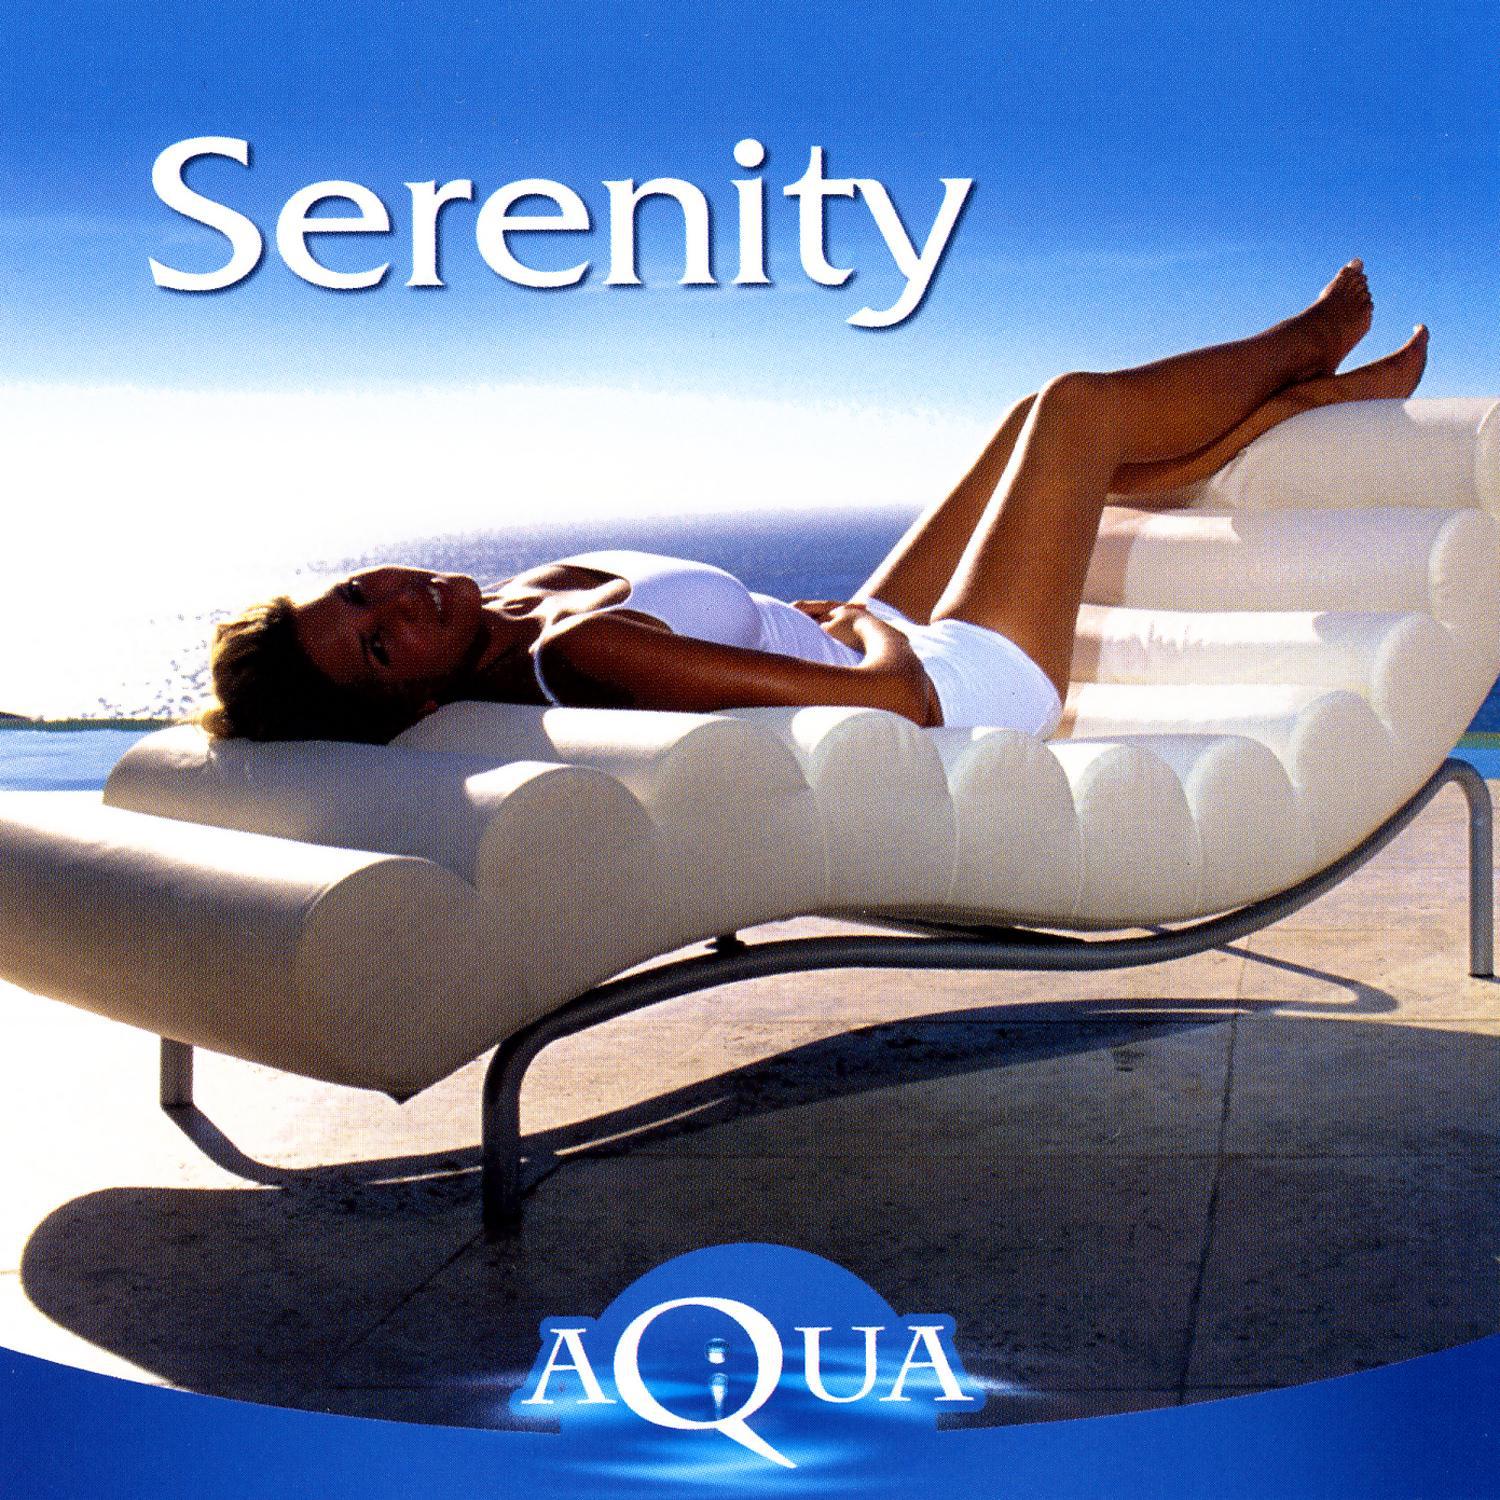 serenity - various artists interpreted by a.m.p.